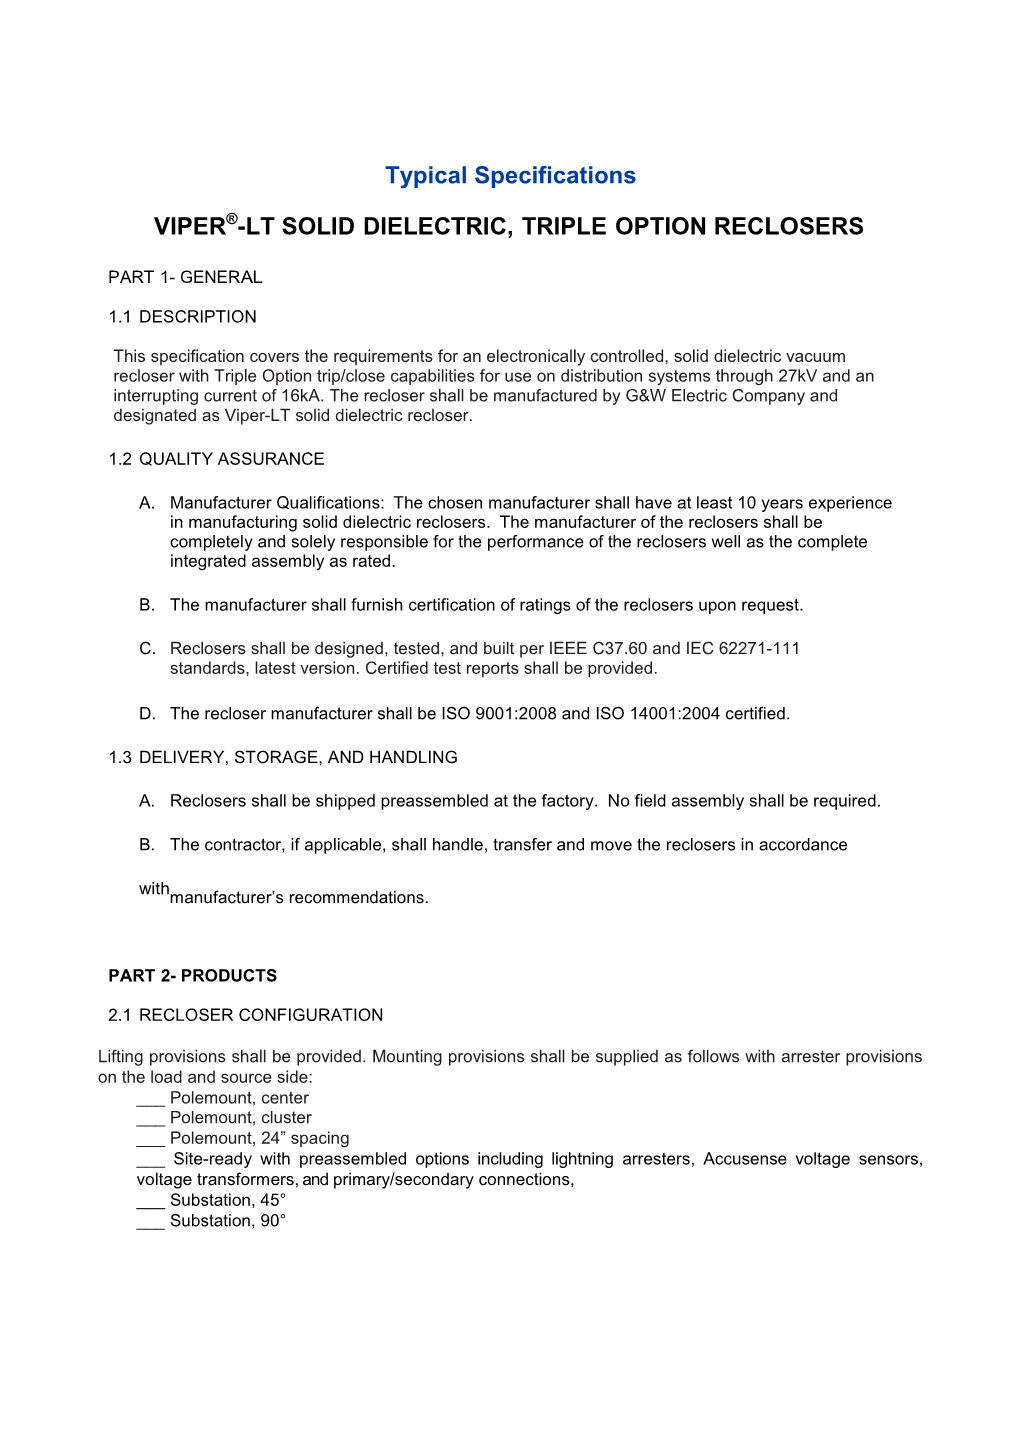 Viper -Lt Solid Dielectric, Triple Option Reclosers